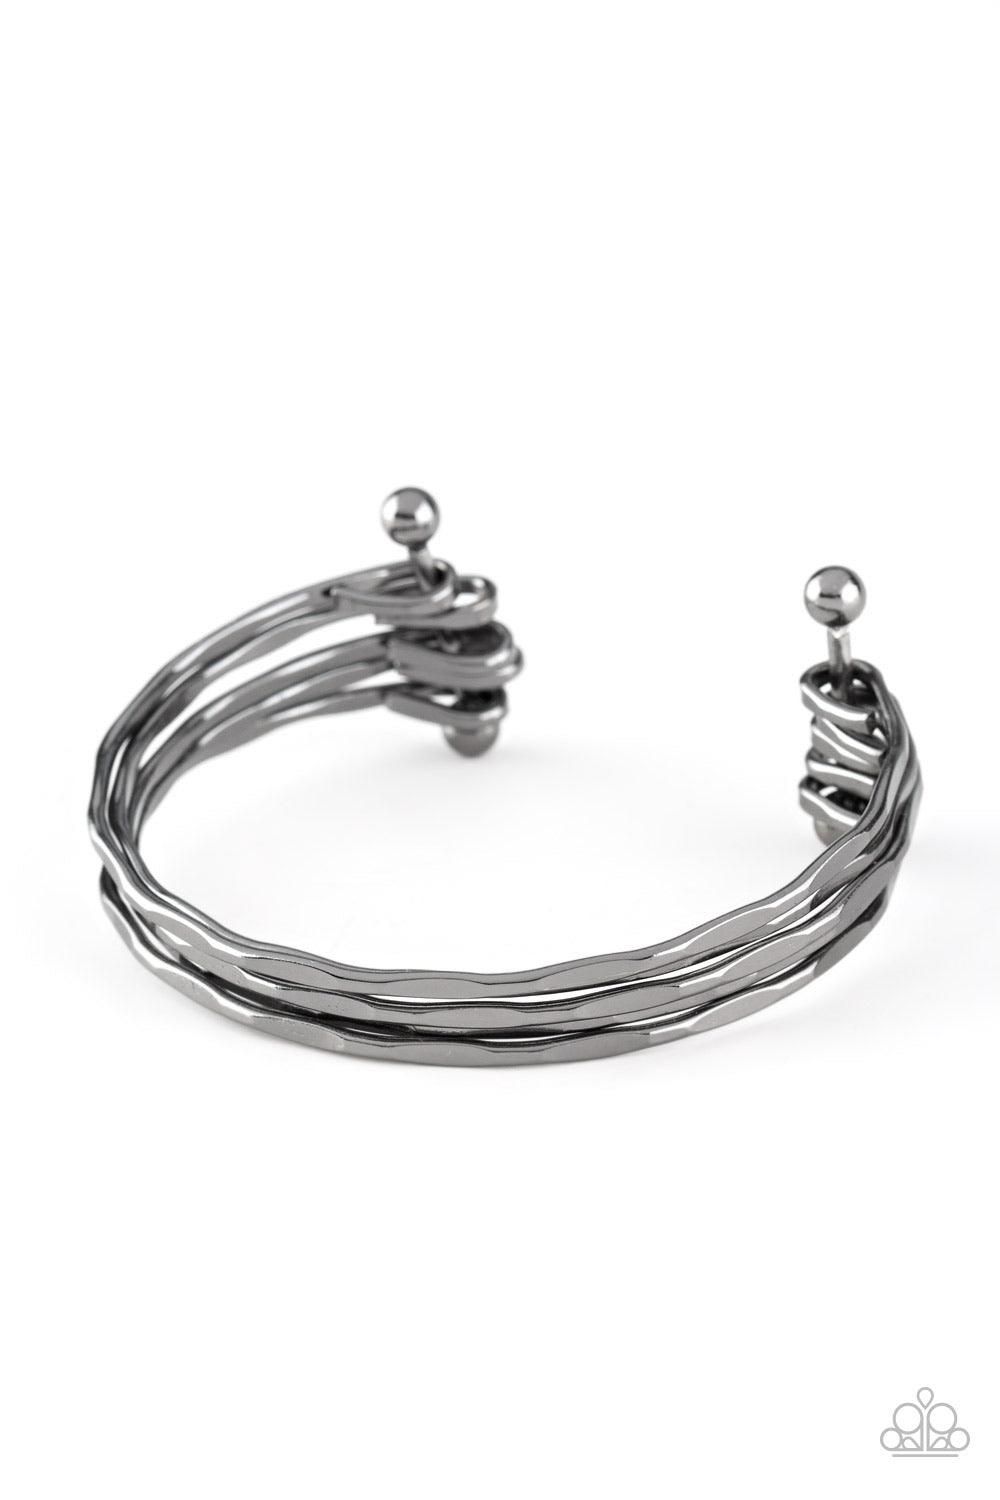 Paparazzi Accessories Street Refinement - Black Delicately hammered in sections of shimmer, glistening gunmetal bars are threaded along two metallic rods, creating a layered cuff across the wrist. Sold as one individual bracelet. Jewelry